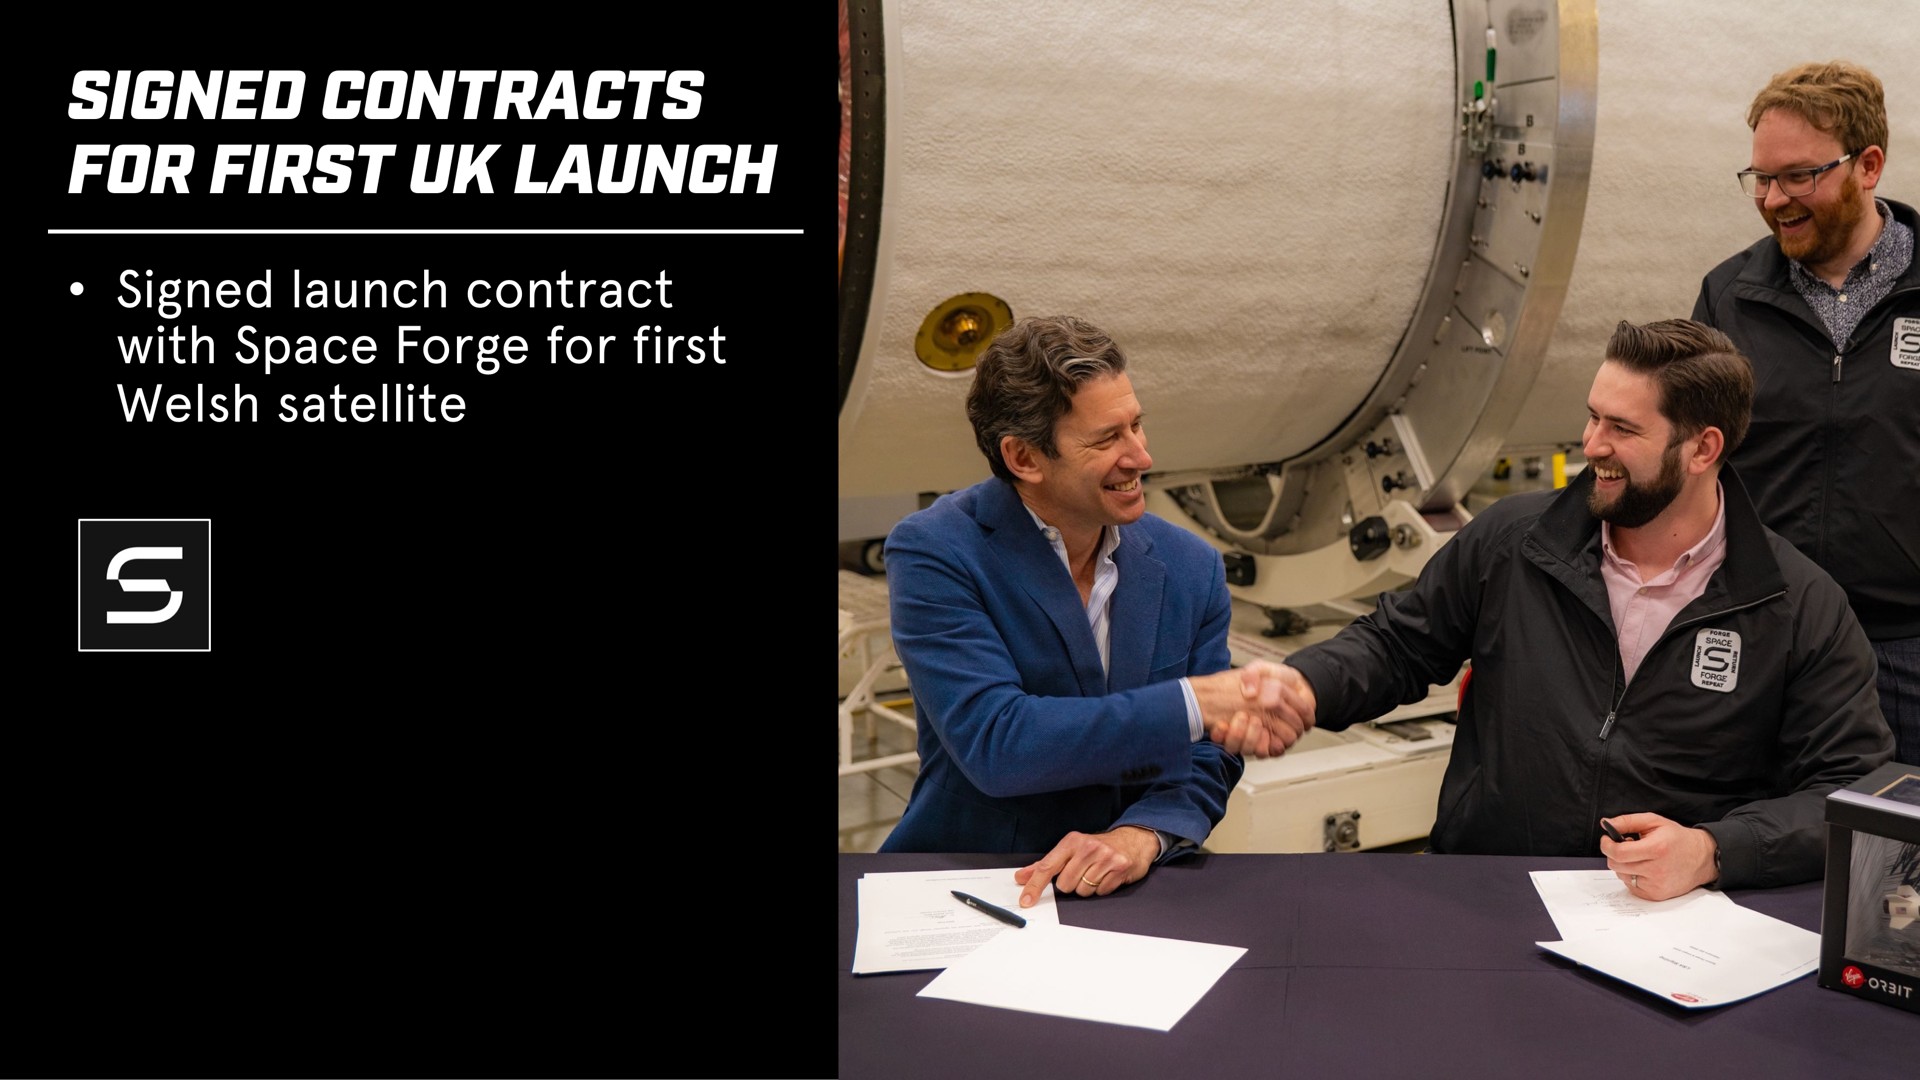 signed contracts for first launch magi | Virgin Orbit